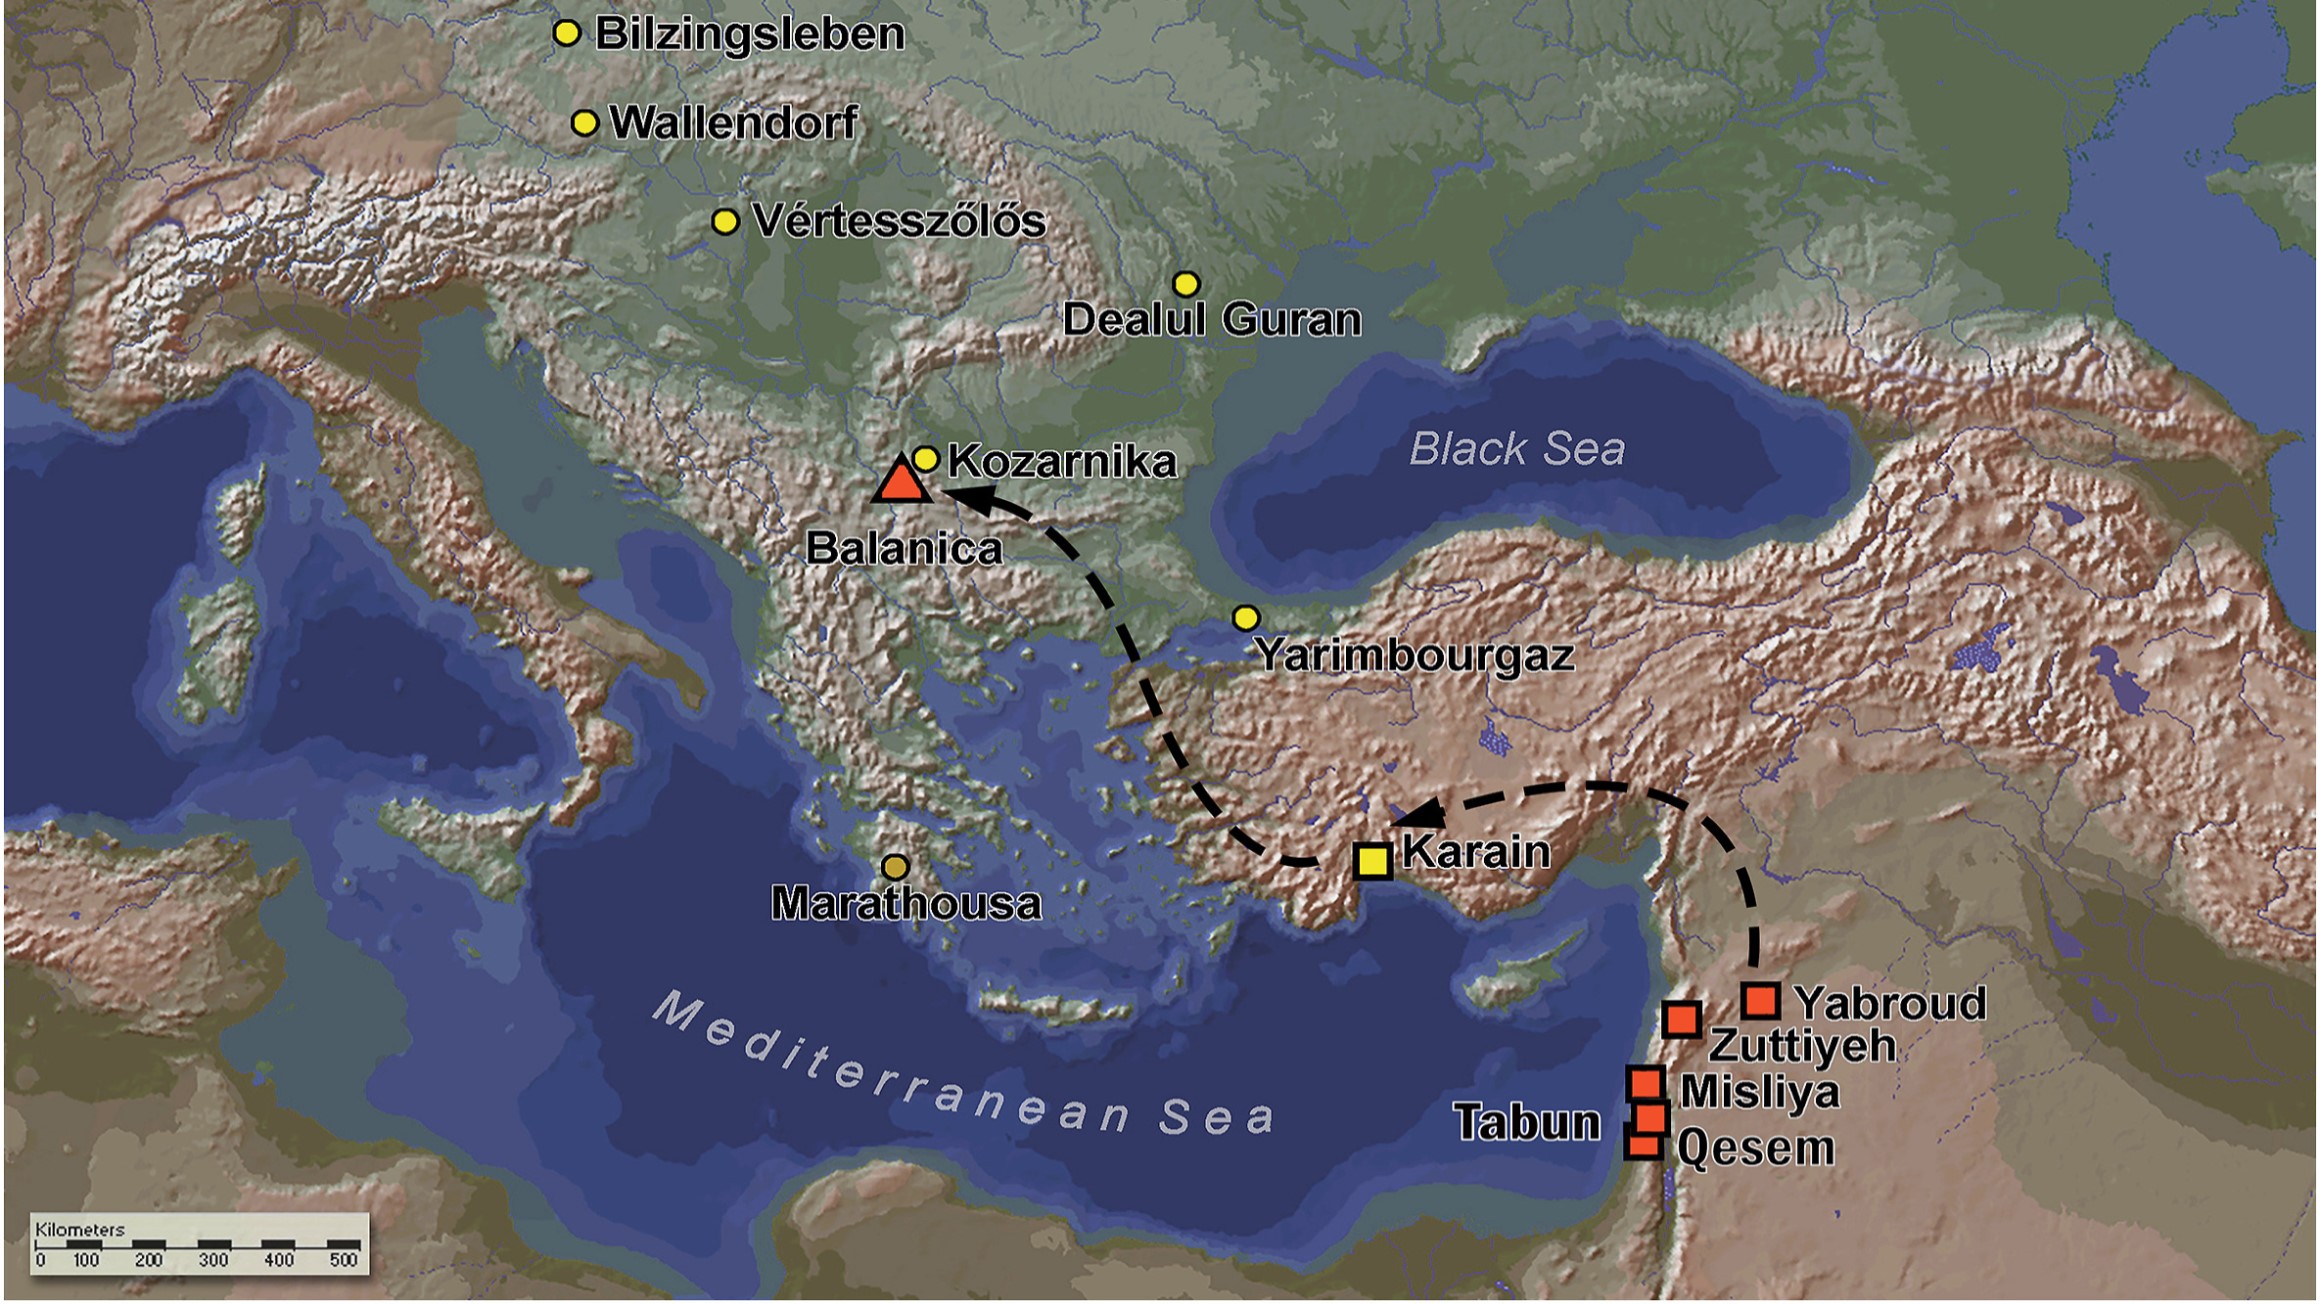 Map of the principal non-Acheulean Middle Pleistocene sites in Central and Southeastern Europe, Anatolia, and the Levant.